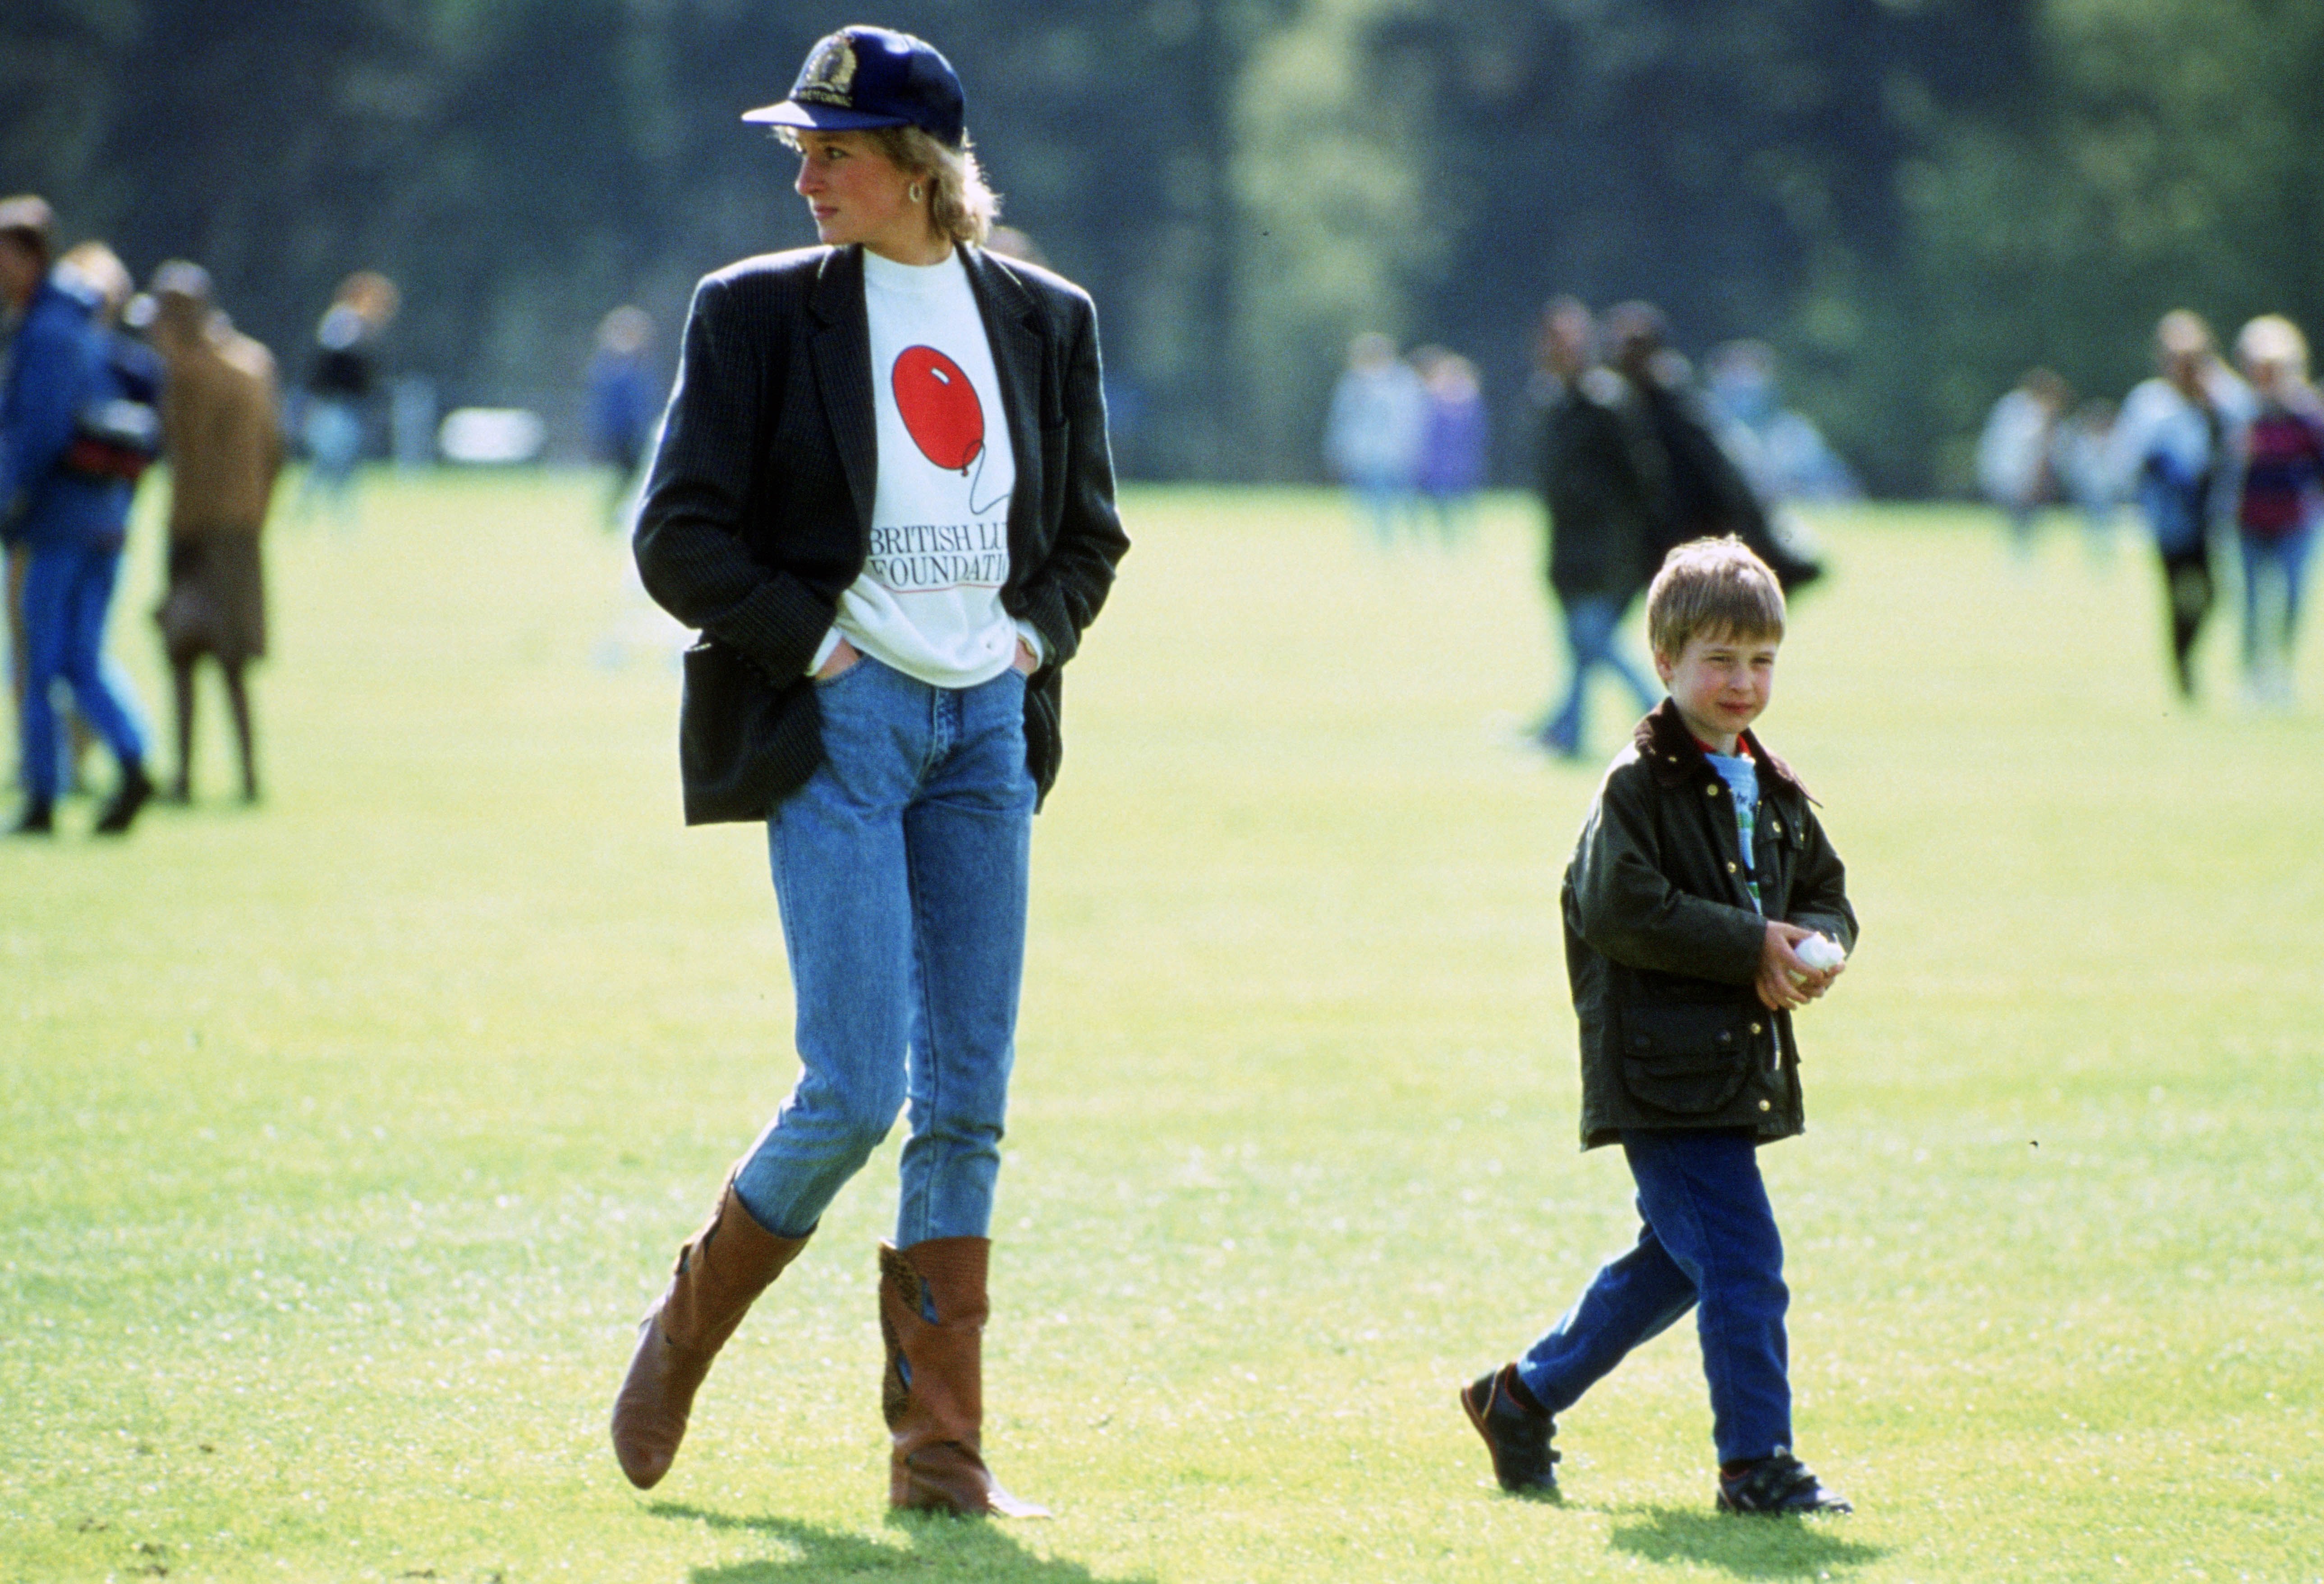 The princess and her son walk in green, brown cowboy boots, blue jeans and a British Lung Foundation sweater under black blazers.